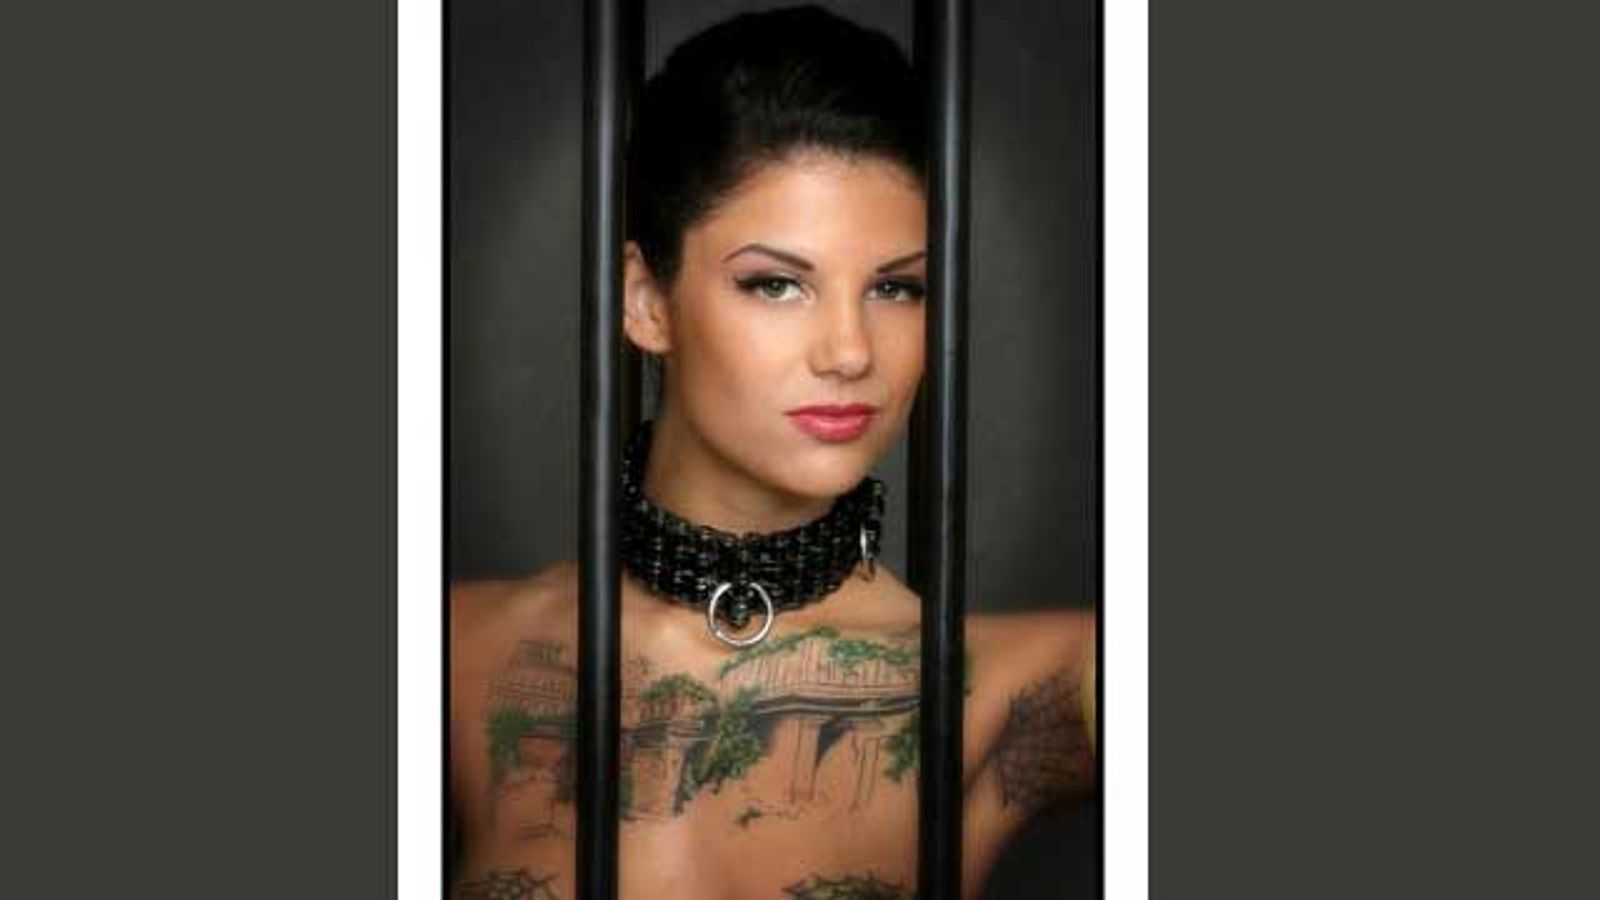 Bonnie Rotten Live on Brazzers Live Today